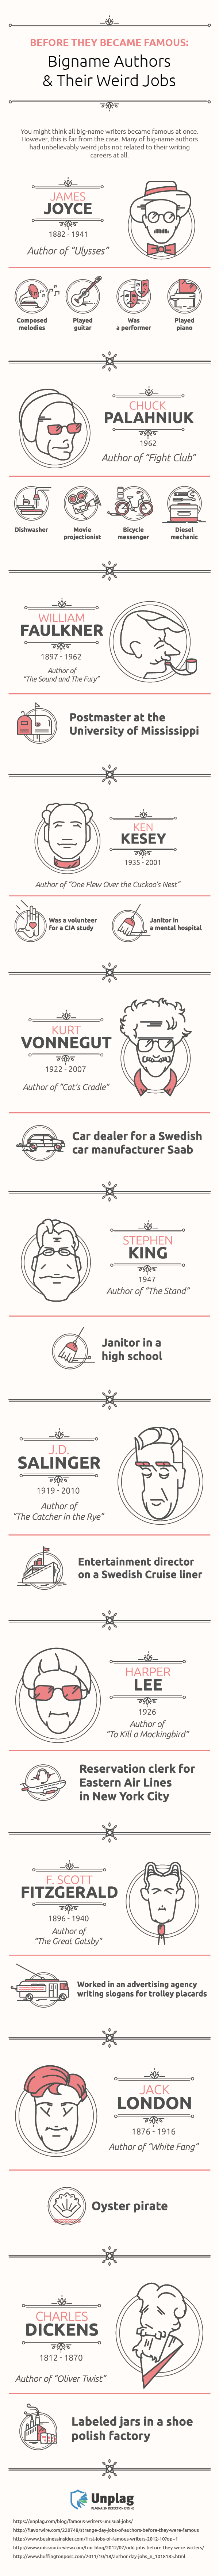 Jobs of Bigname Authors Before They Became Famous